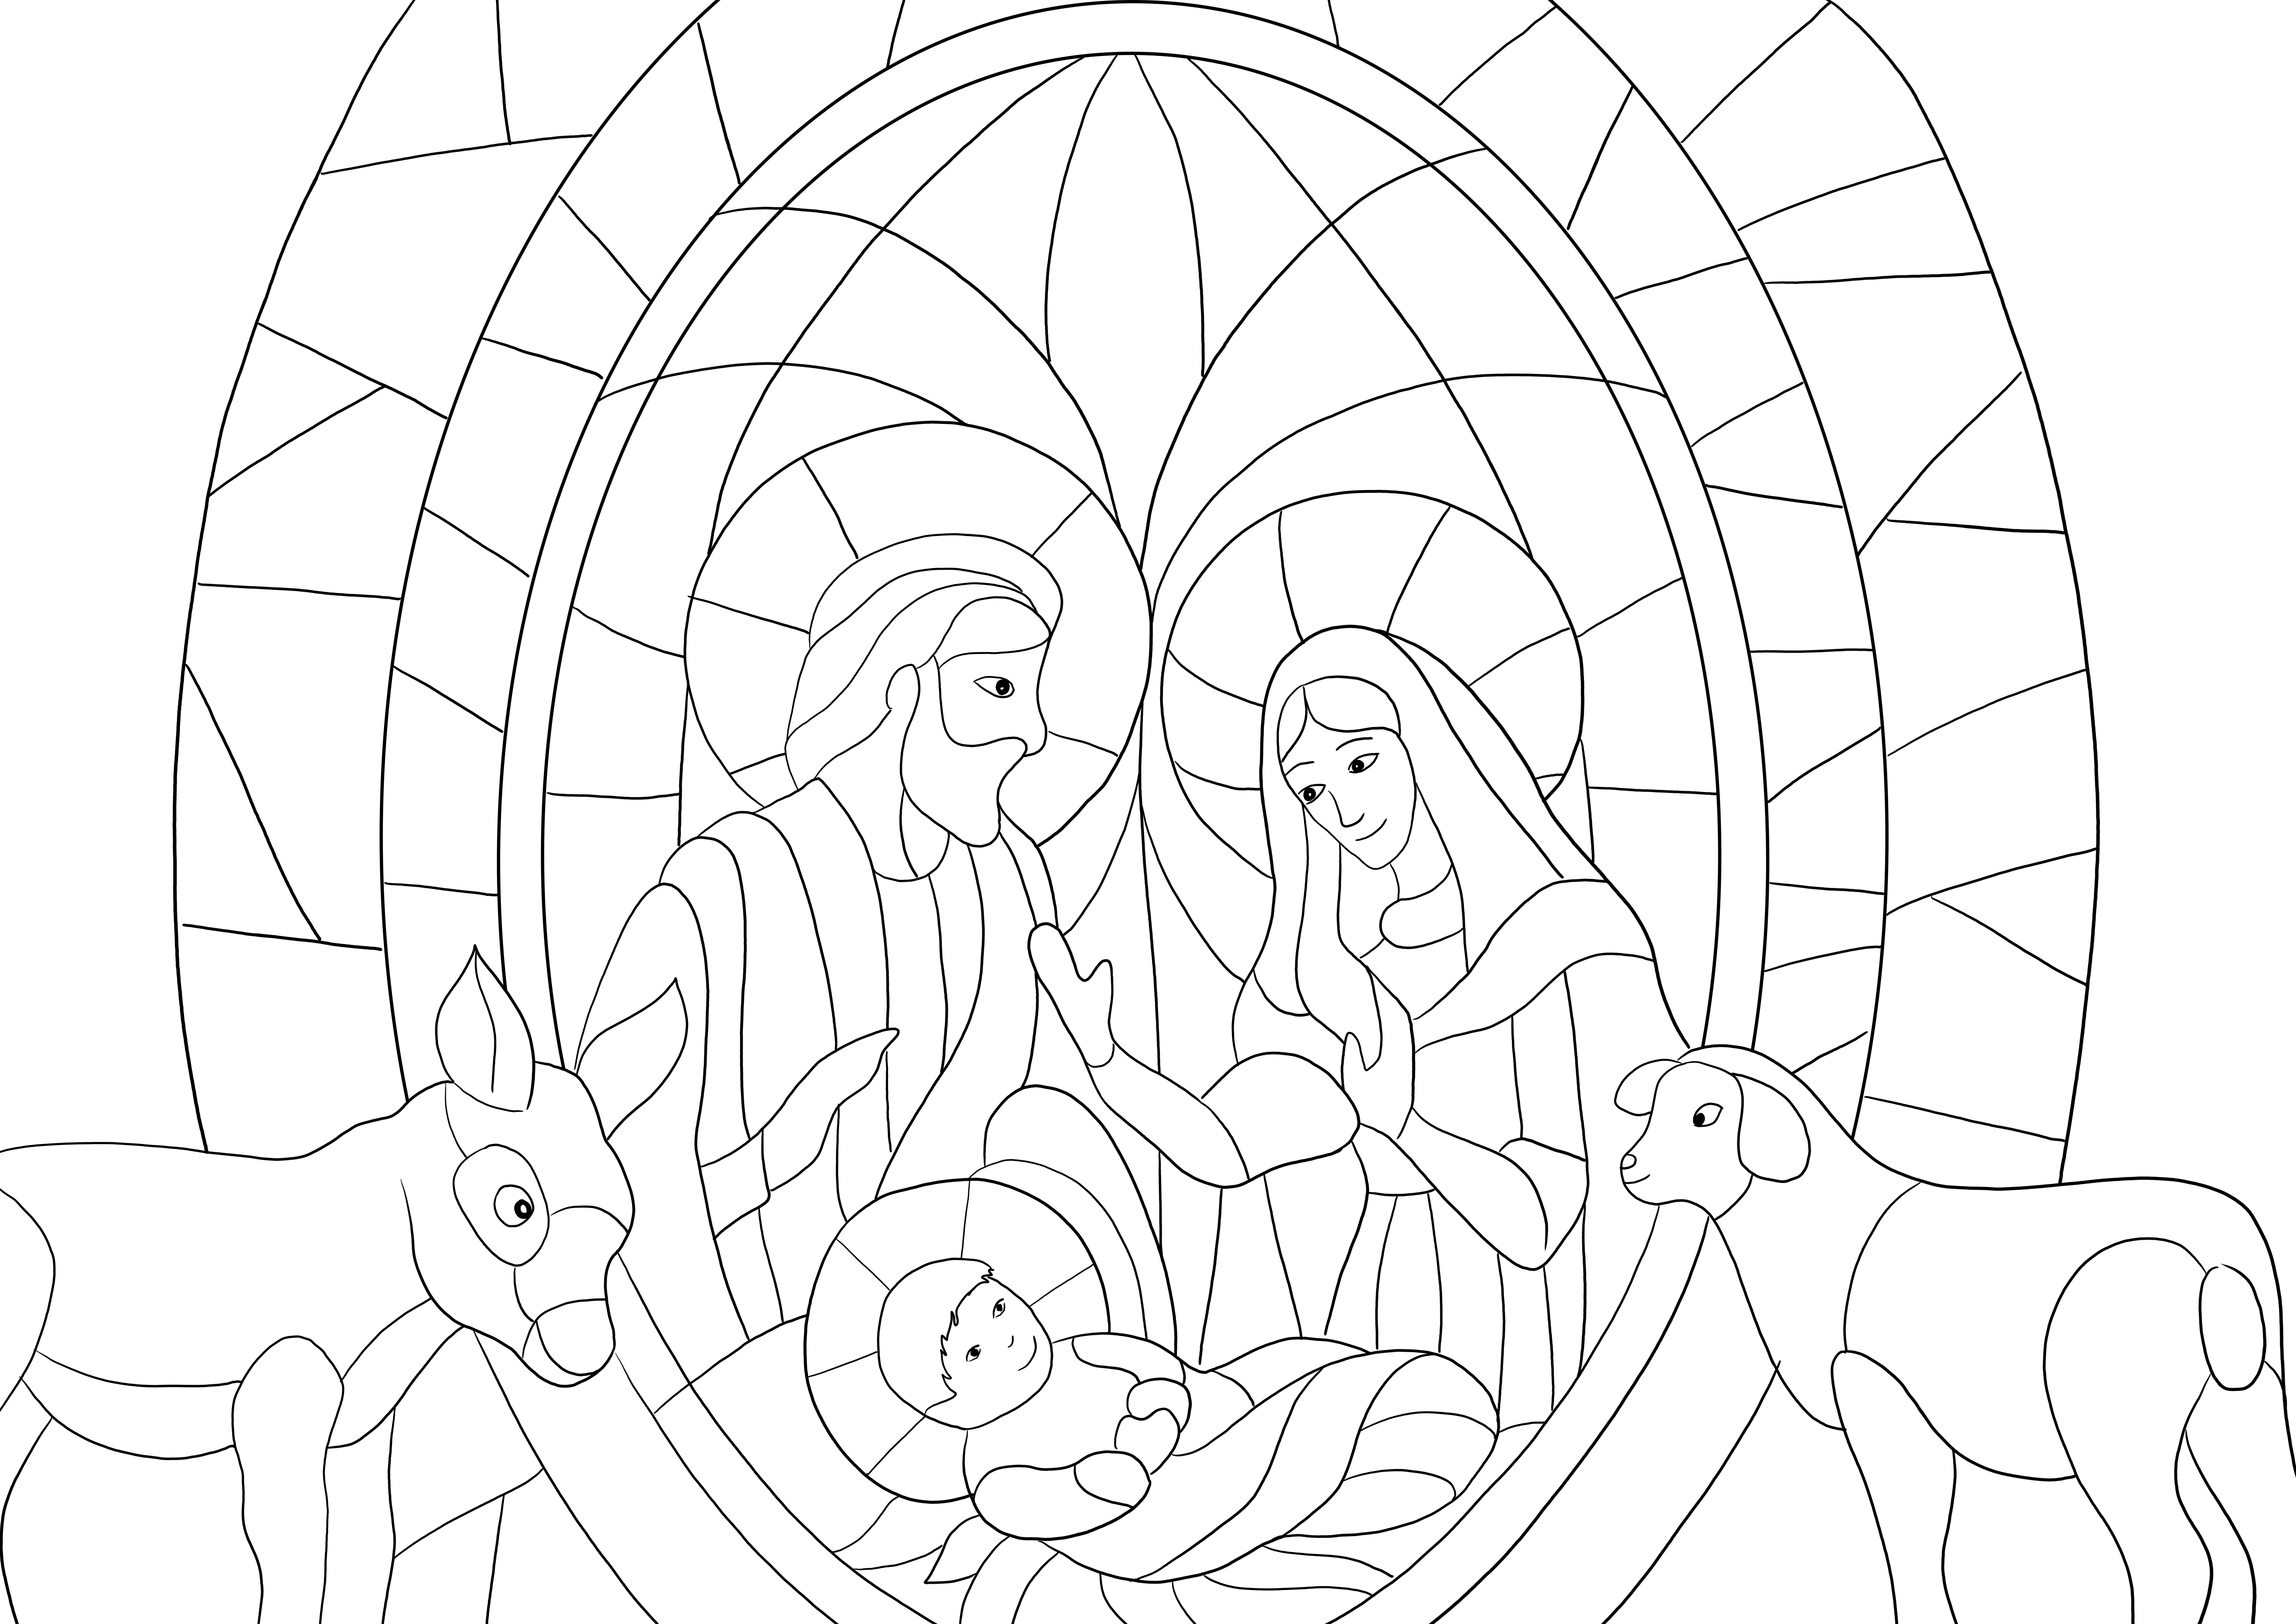 Beautiful coloring image of the birth of Jesus free to download or print